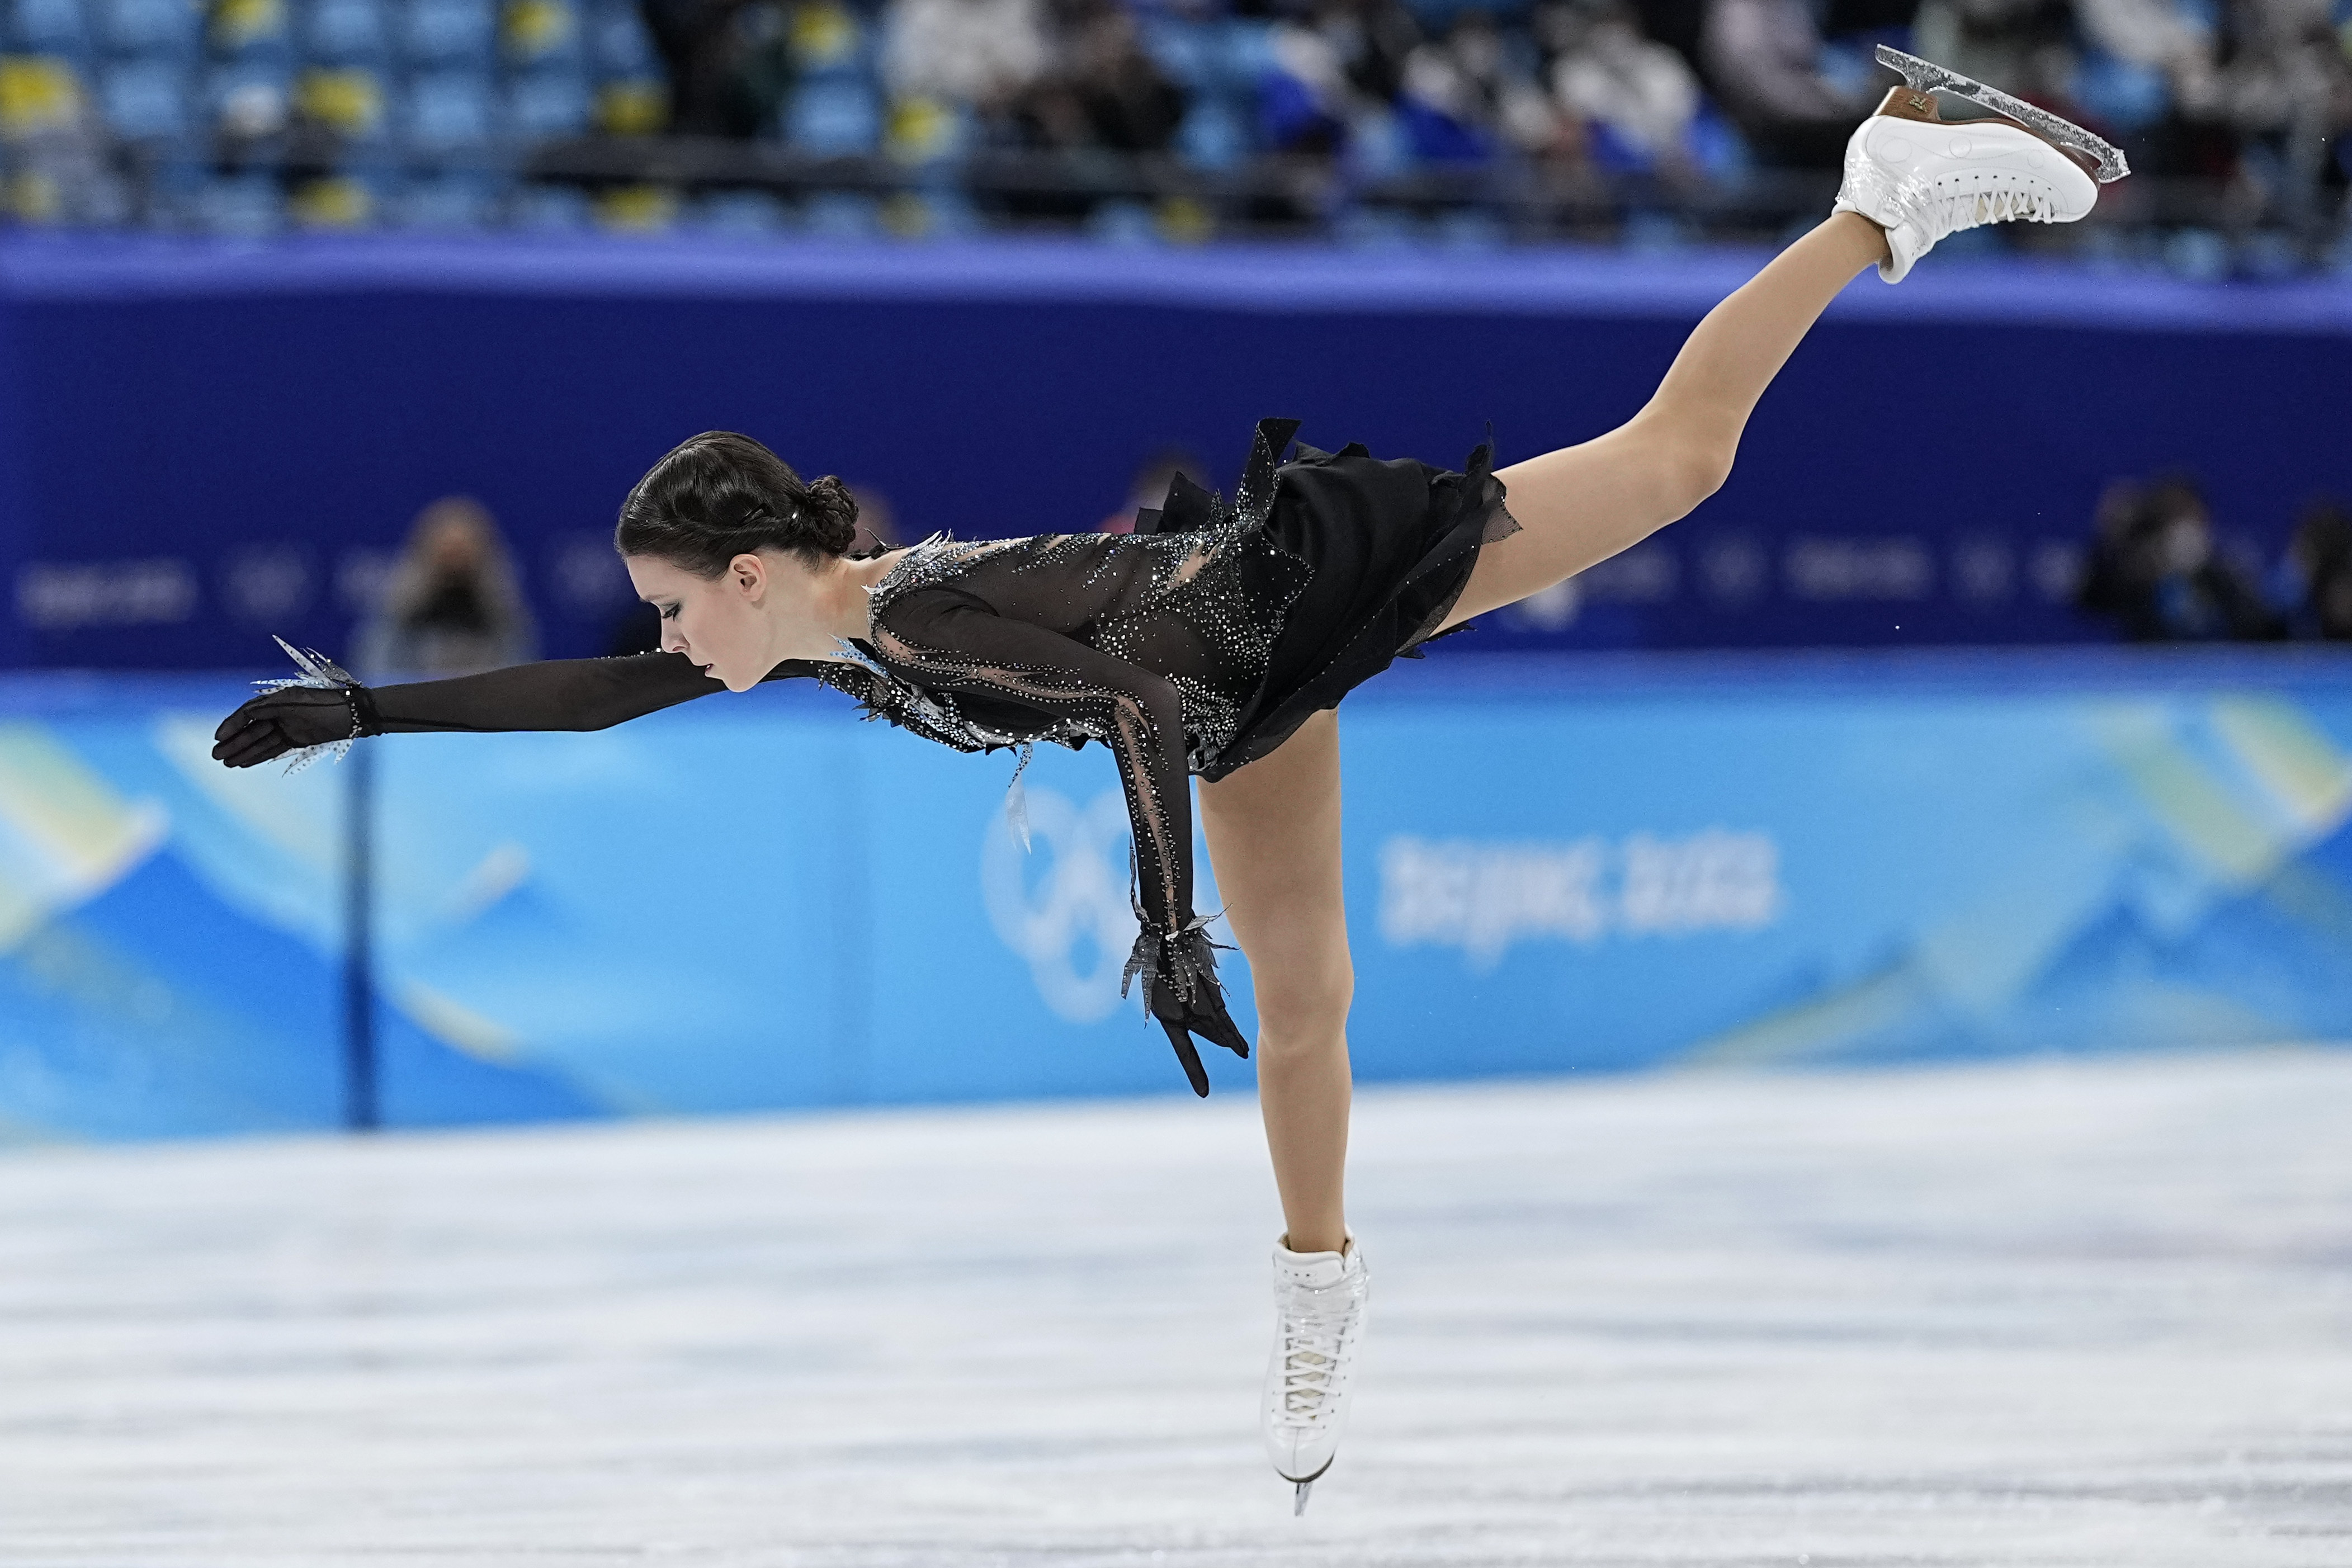 Miss Watching Womens Figure Skating Short Program Live? How to Watch it Again